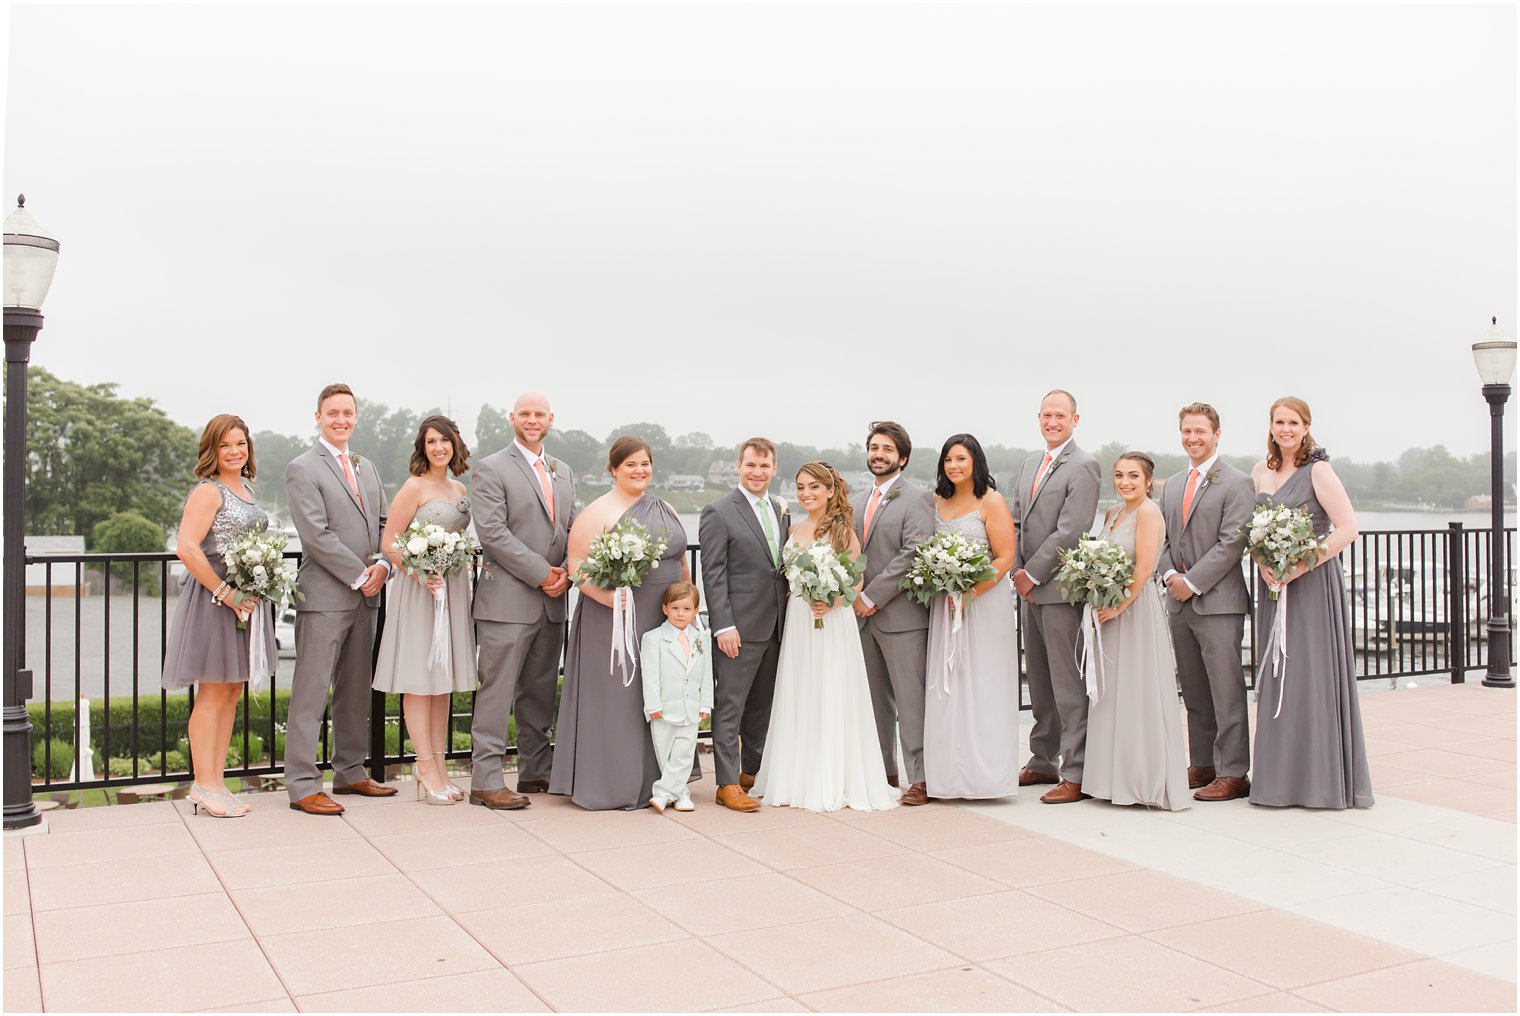 Bridal party in shades of gray